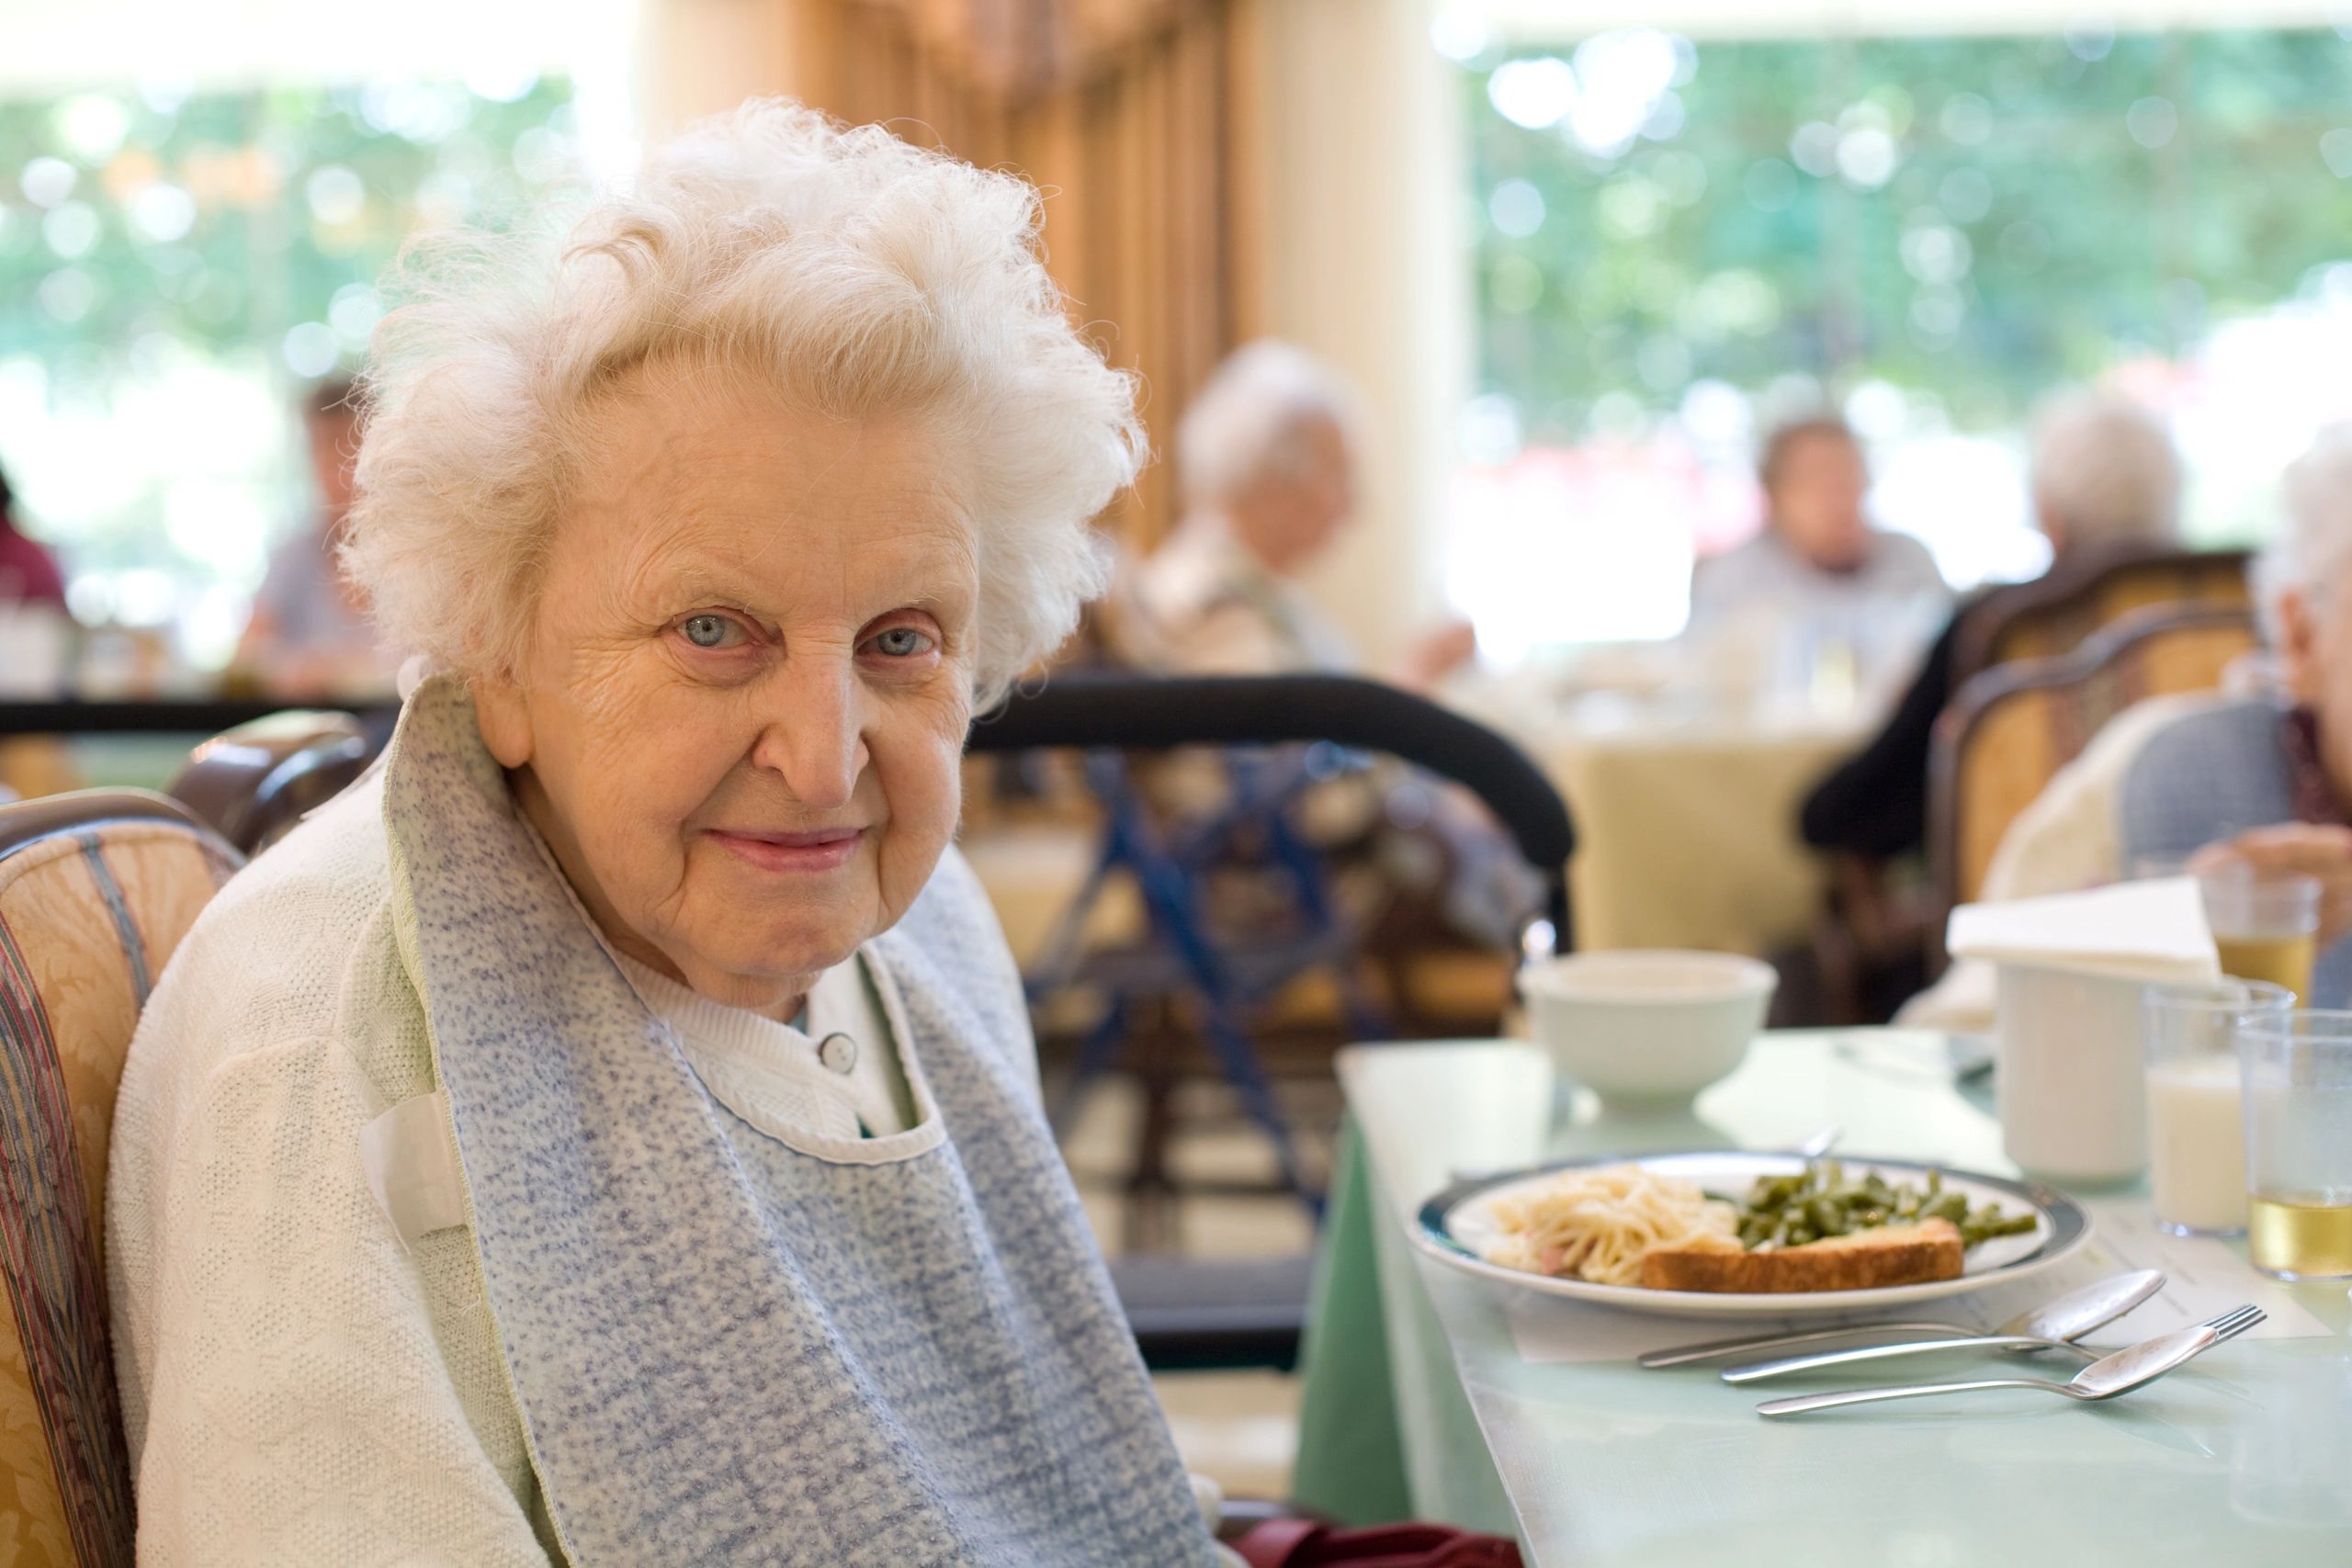 An older adult seated with her plate at a dinner table 